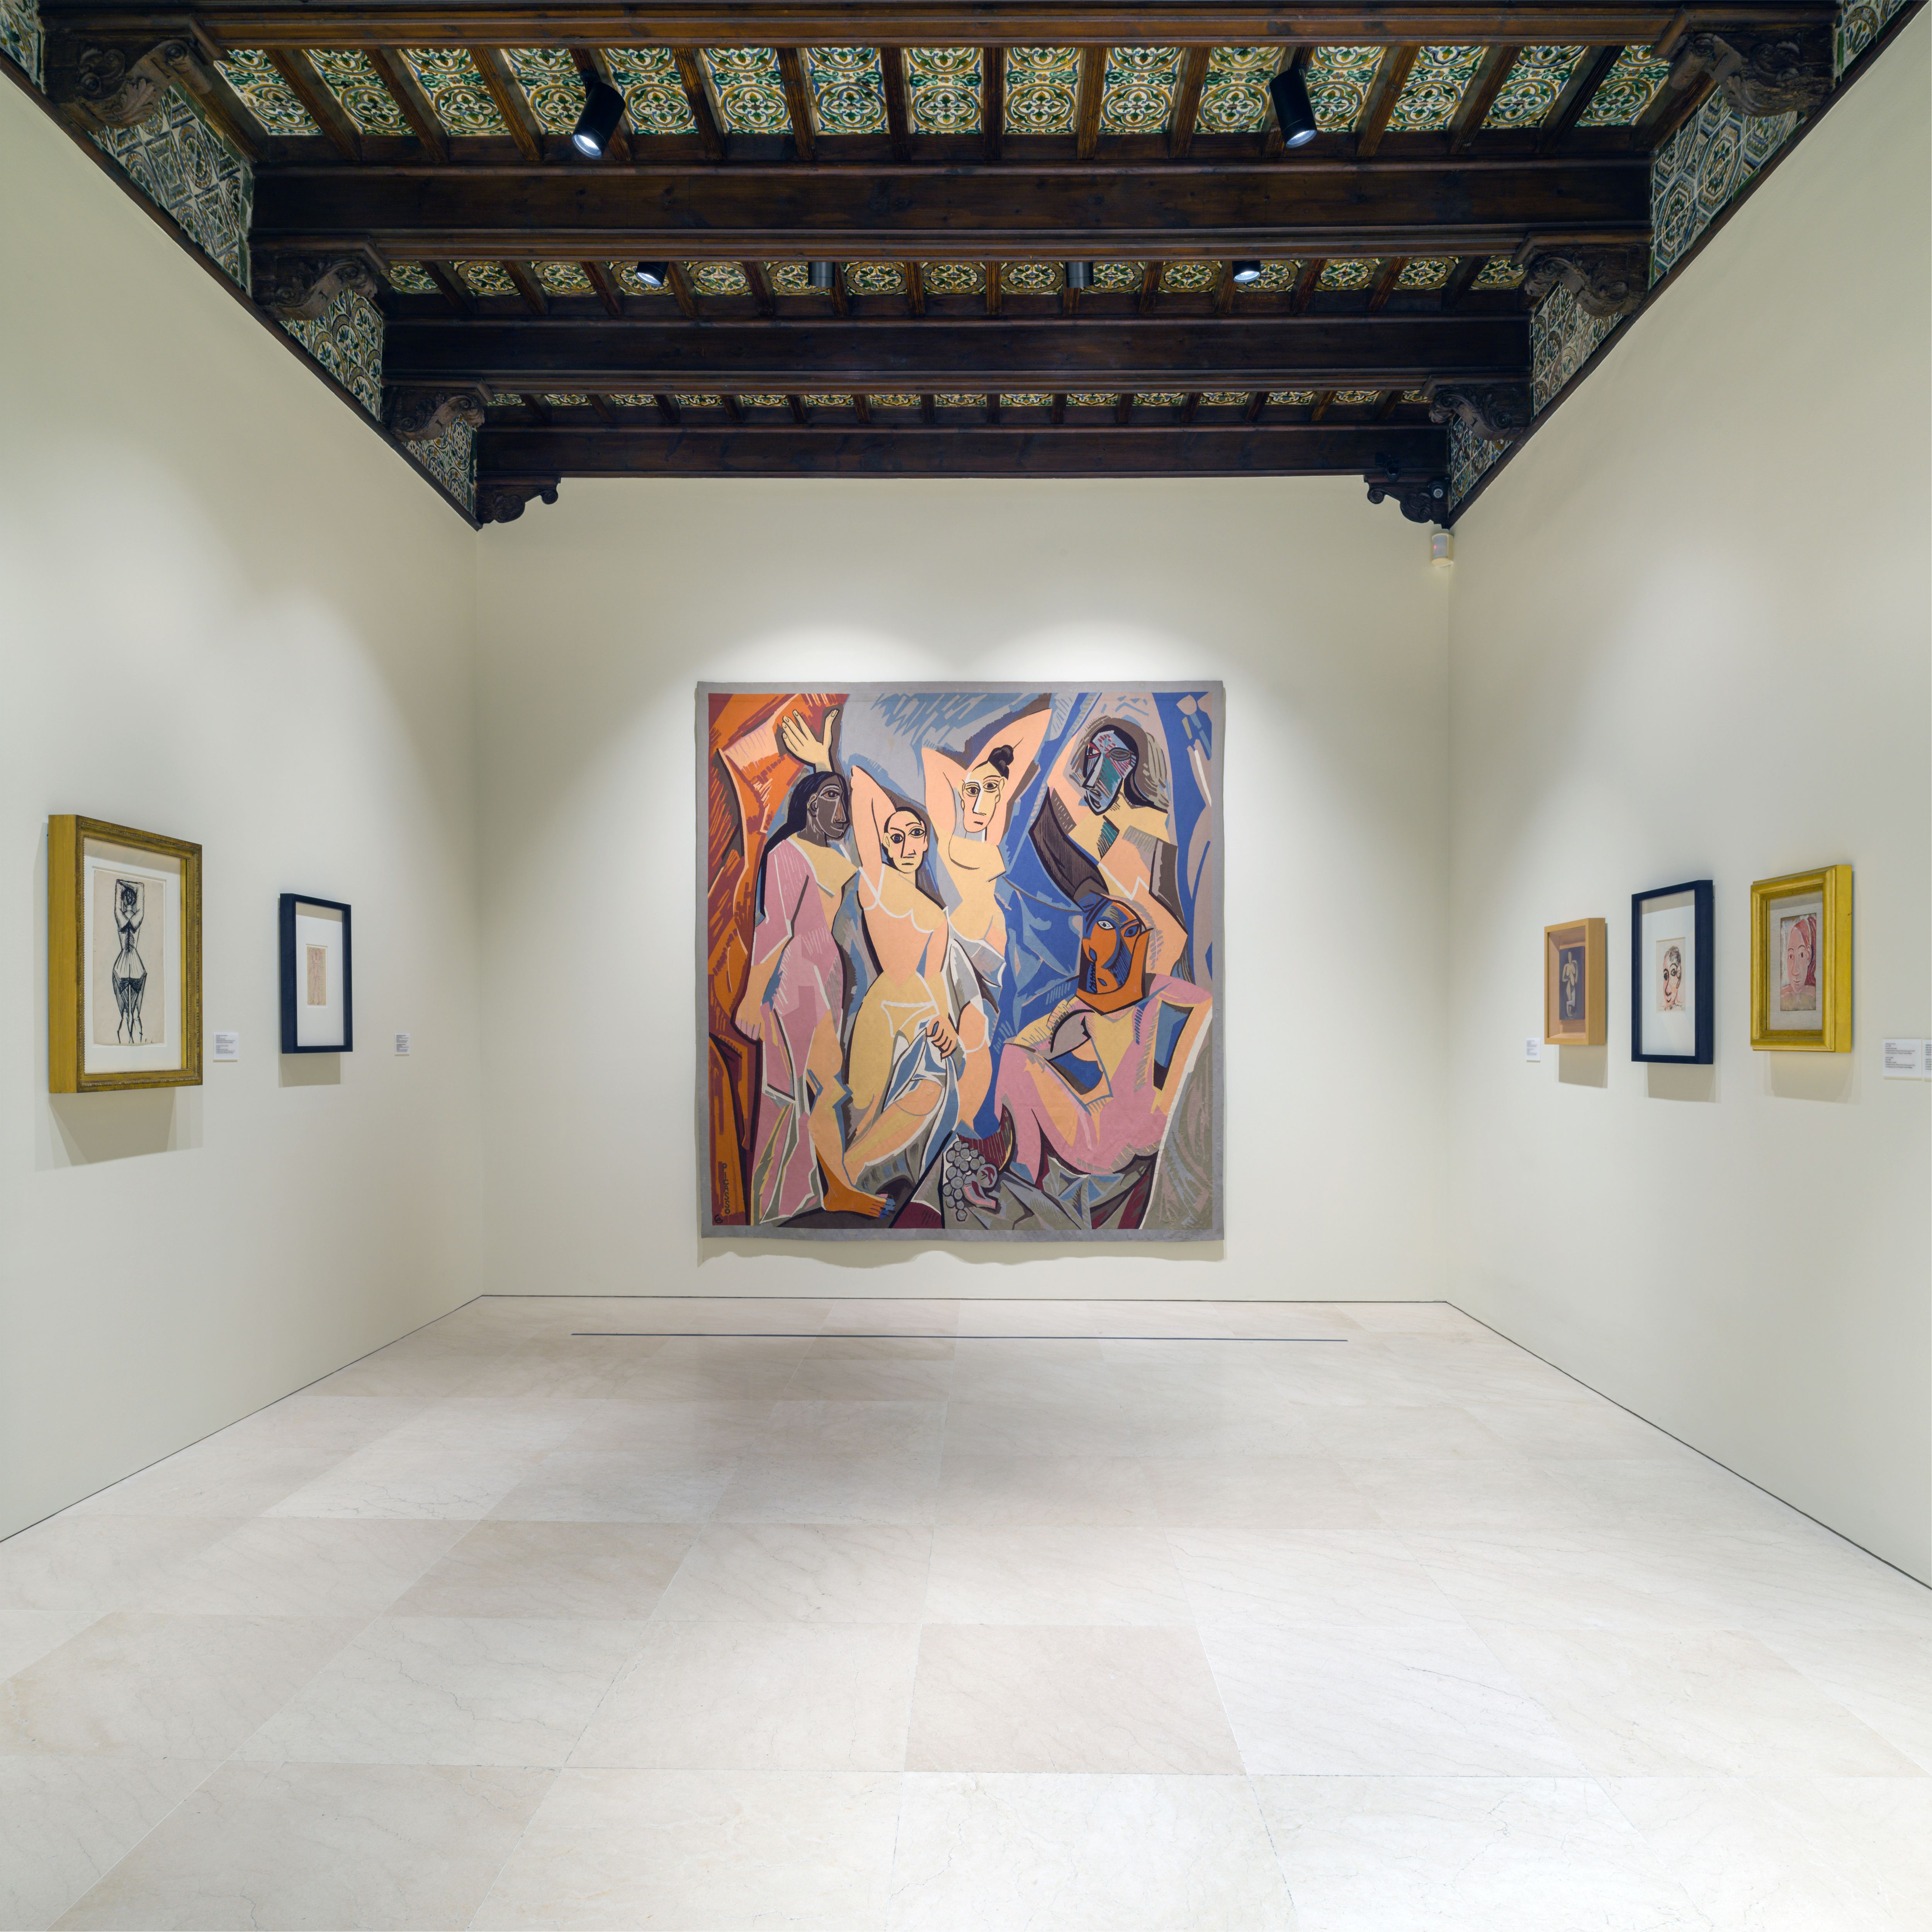 Soak up the culture at Picasso's museum